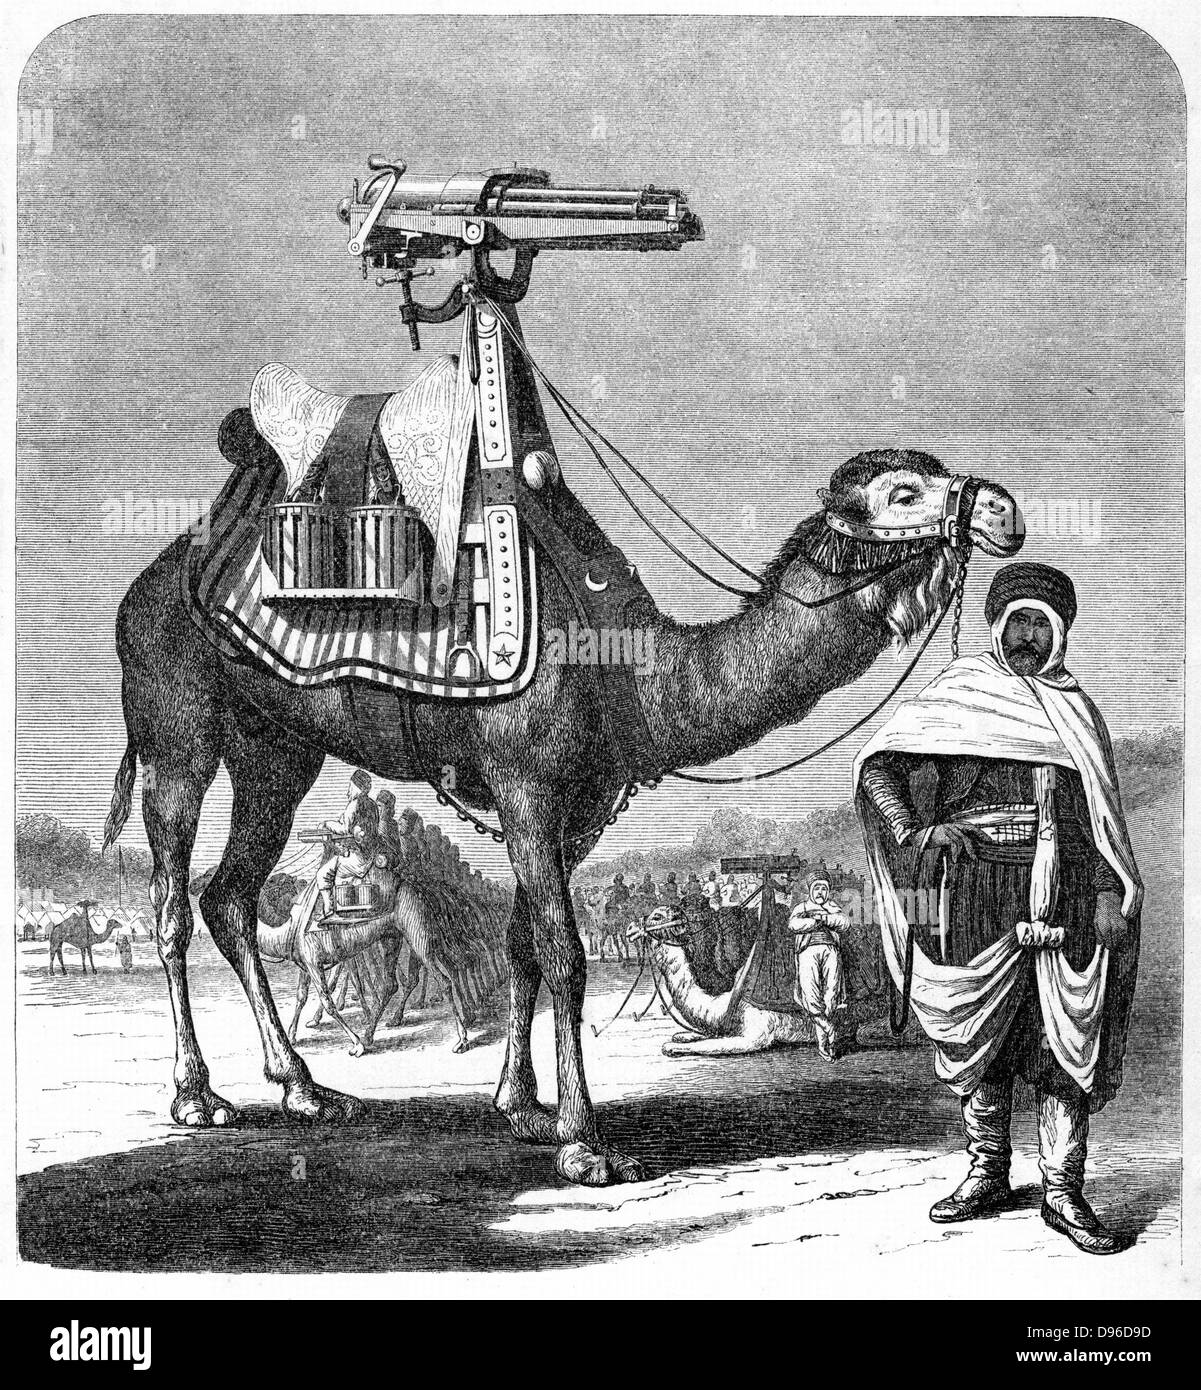 Gatling rapid fire gun (1861-62): Camel-mounted model. From 'The Science Record' New York, 1862. Engraving Stock Photo